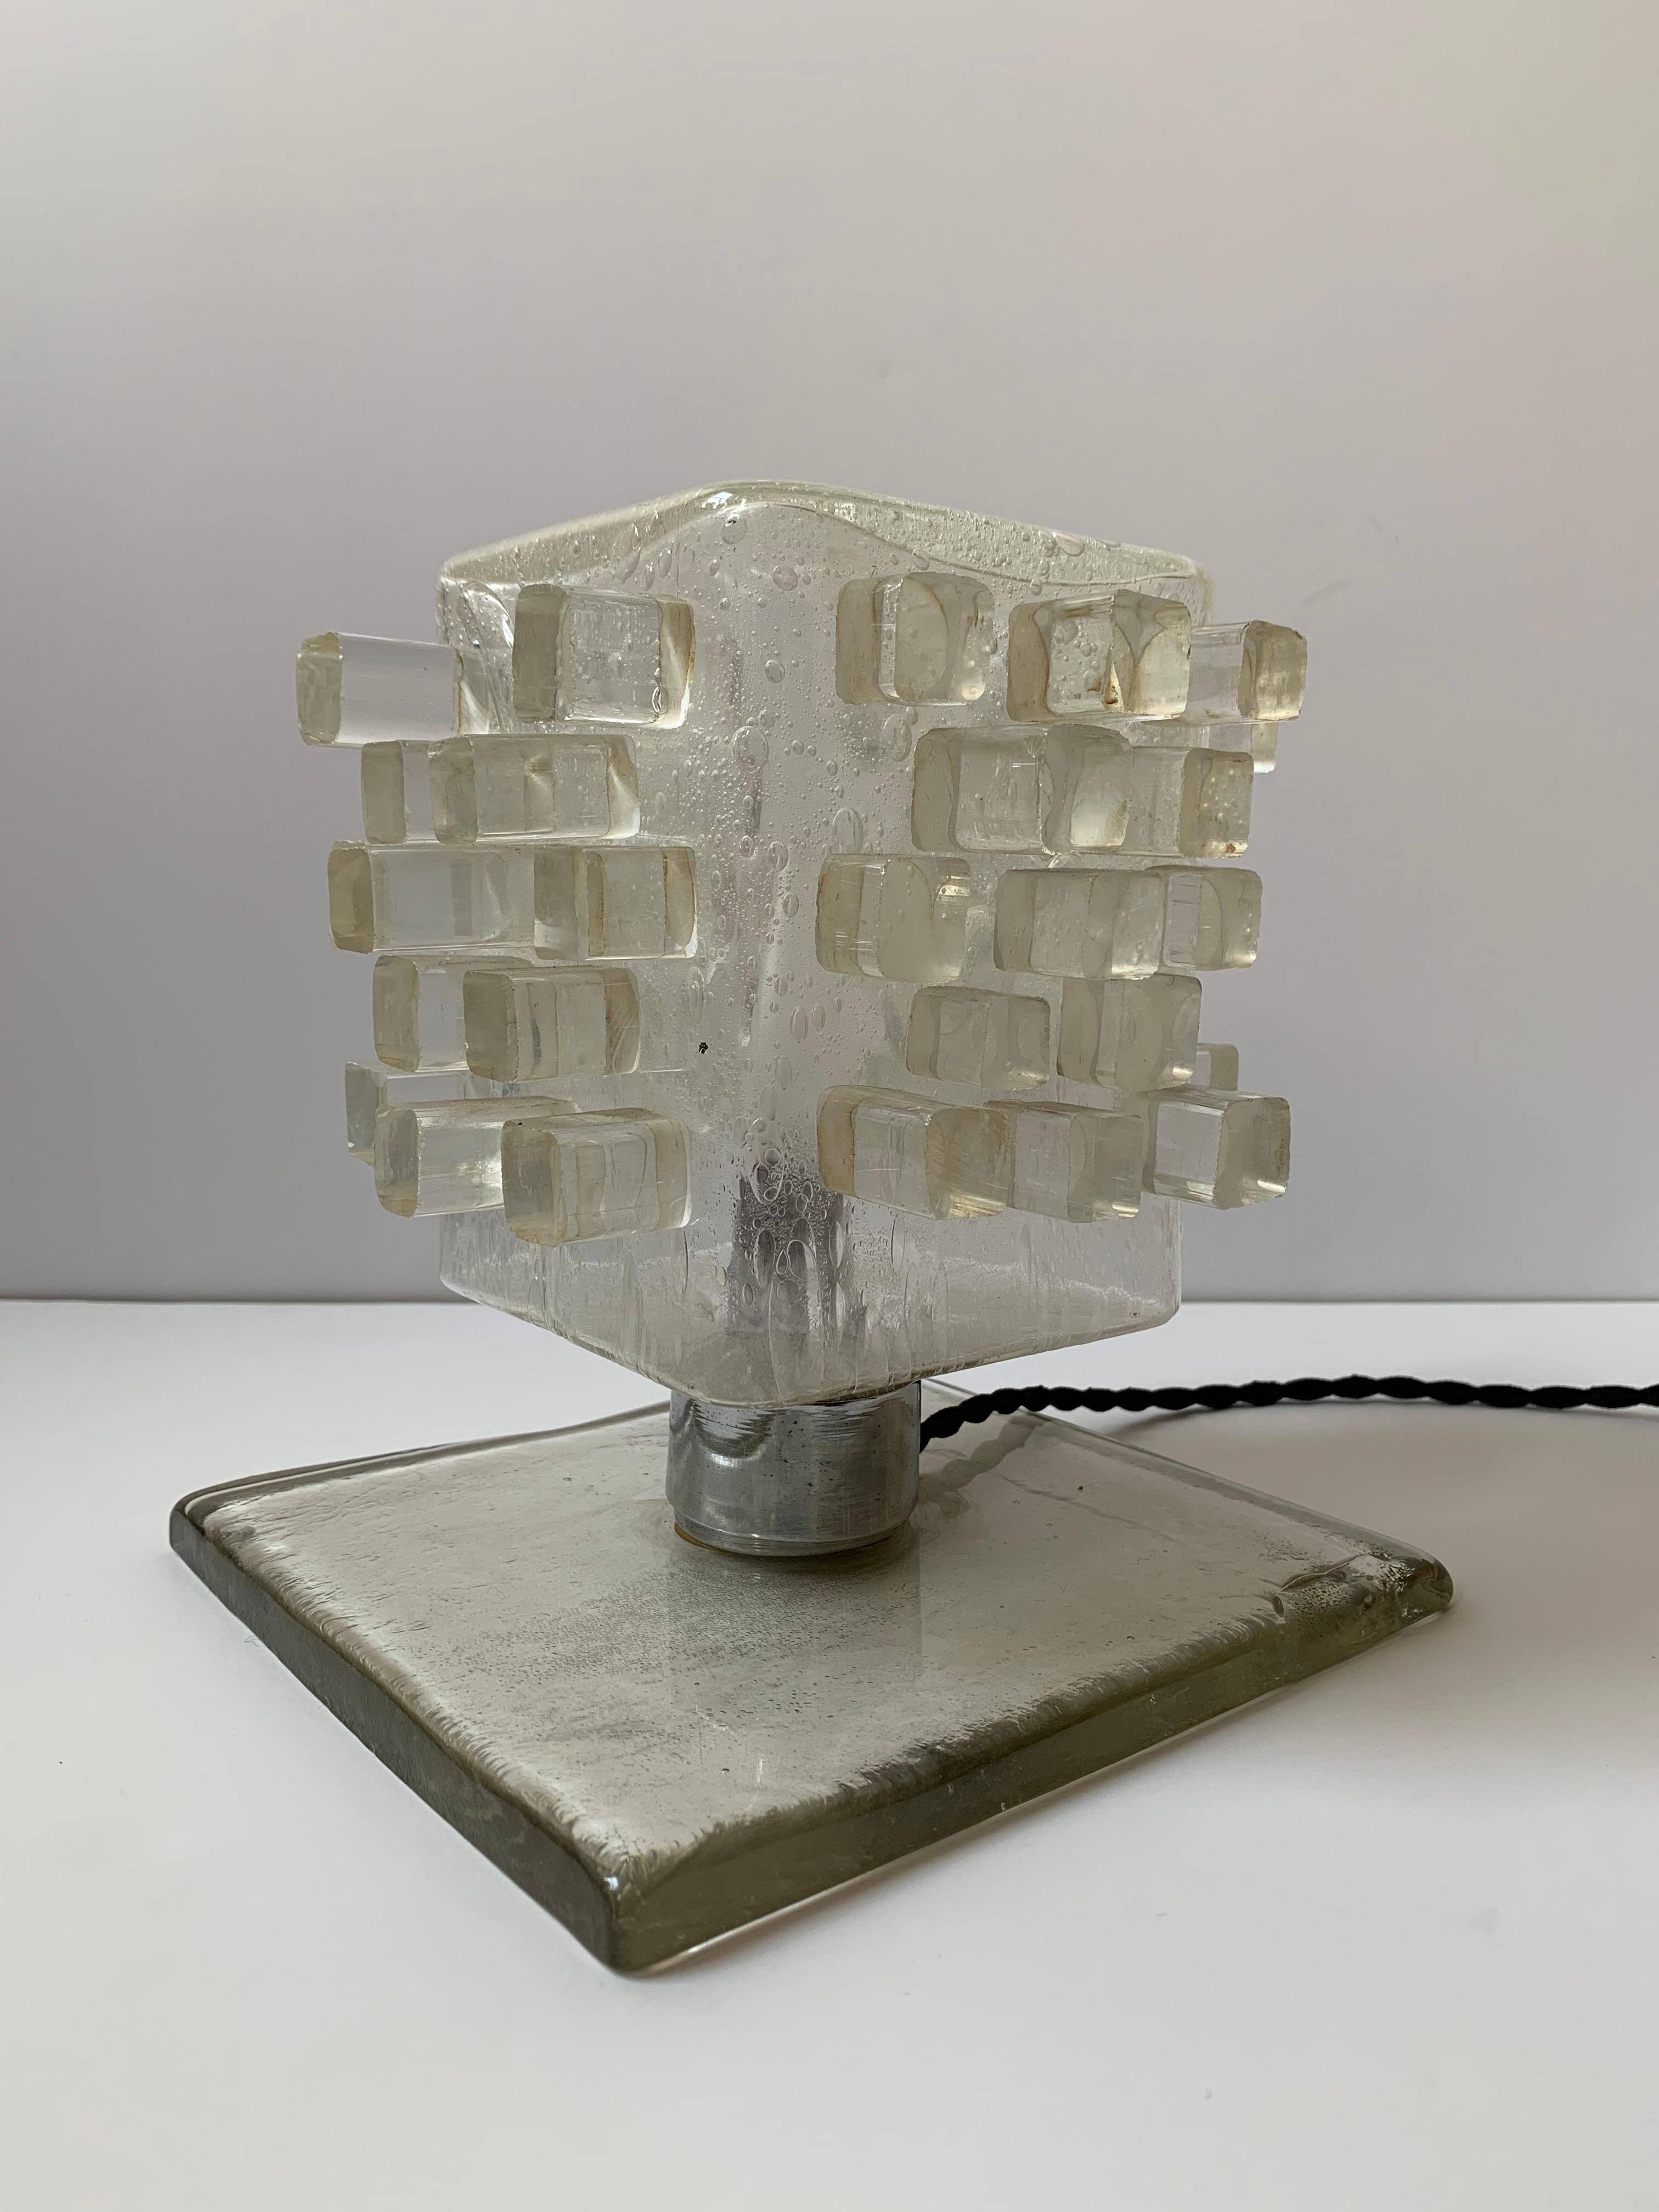 This is a very rare and early production table lamp by Poliarte.  